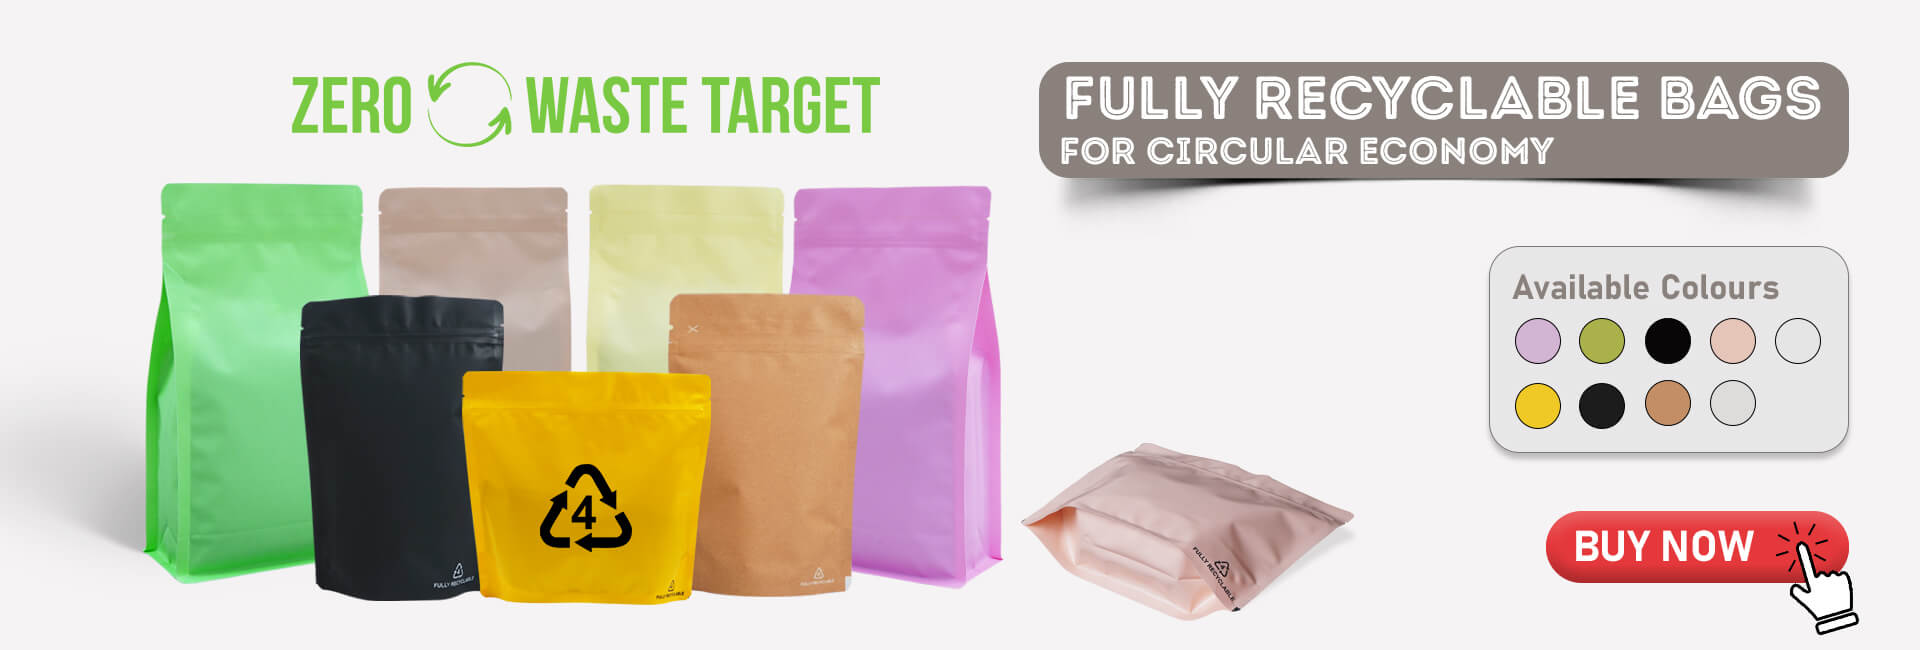 Fully Recyclable Bags